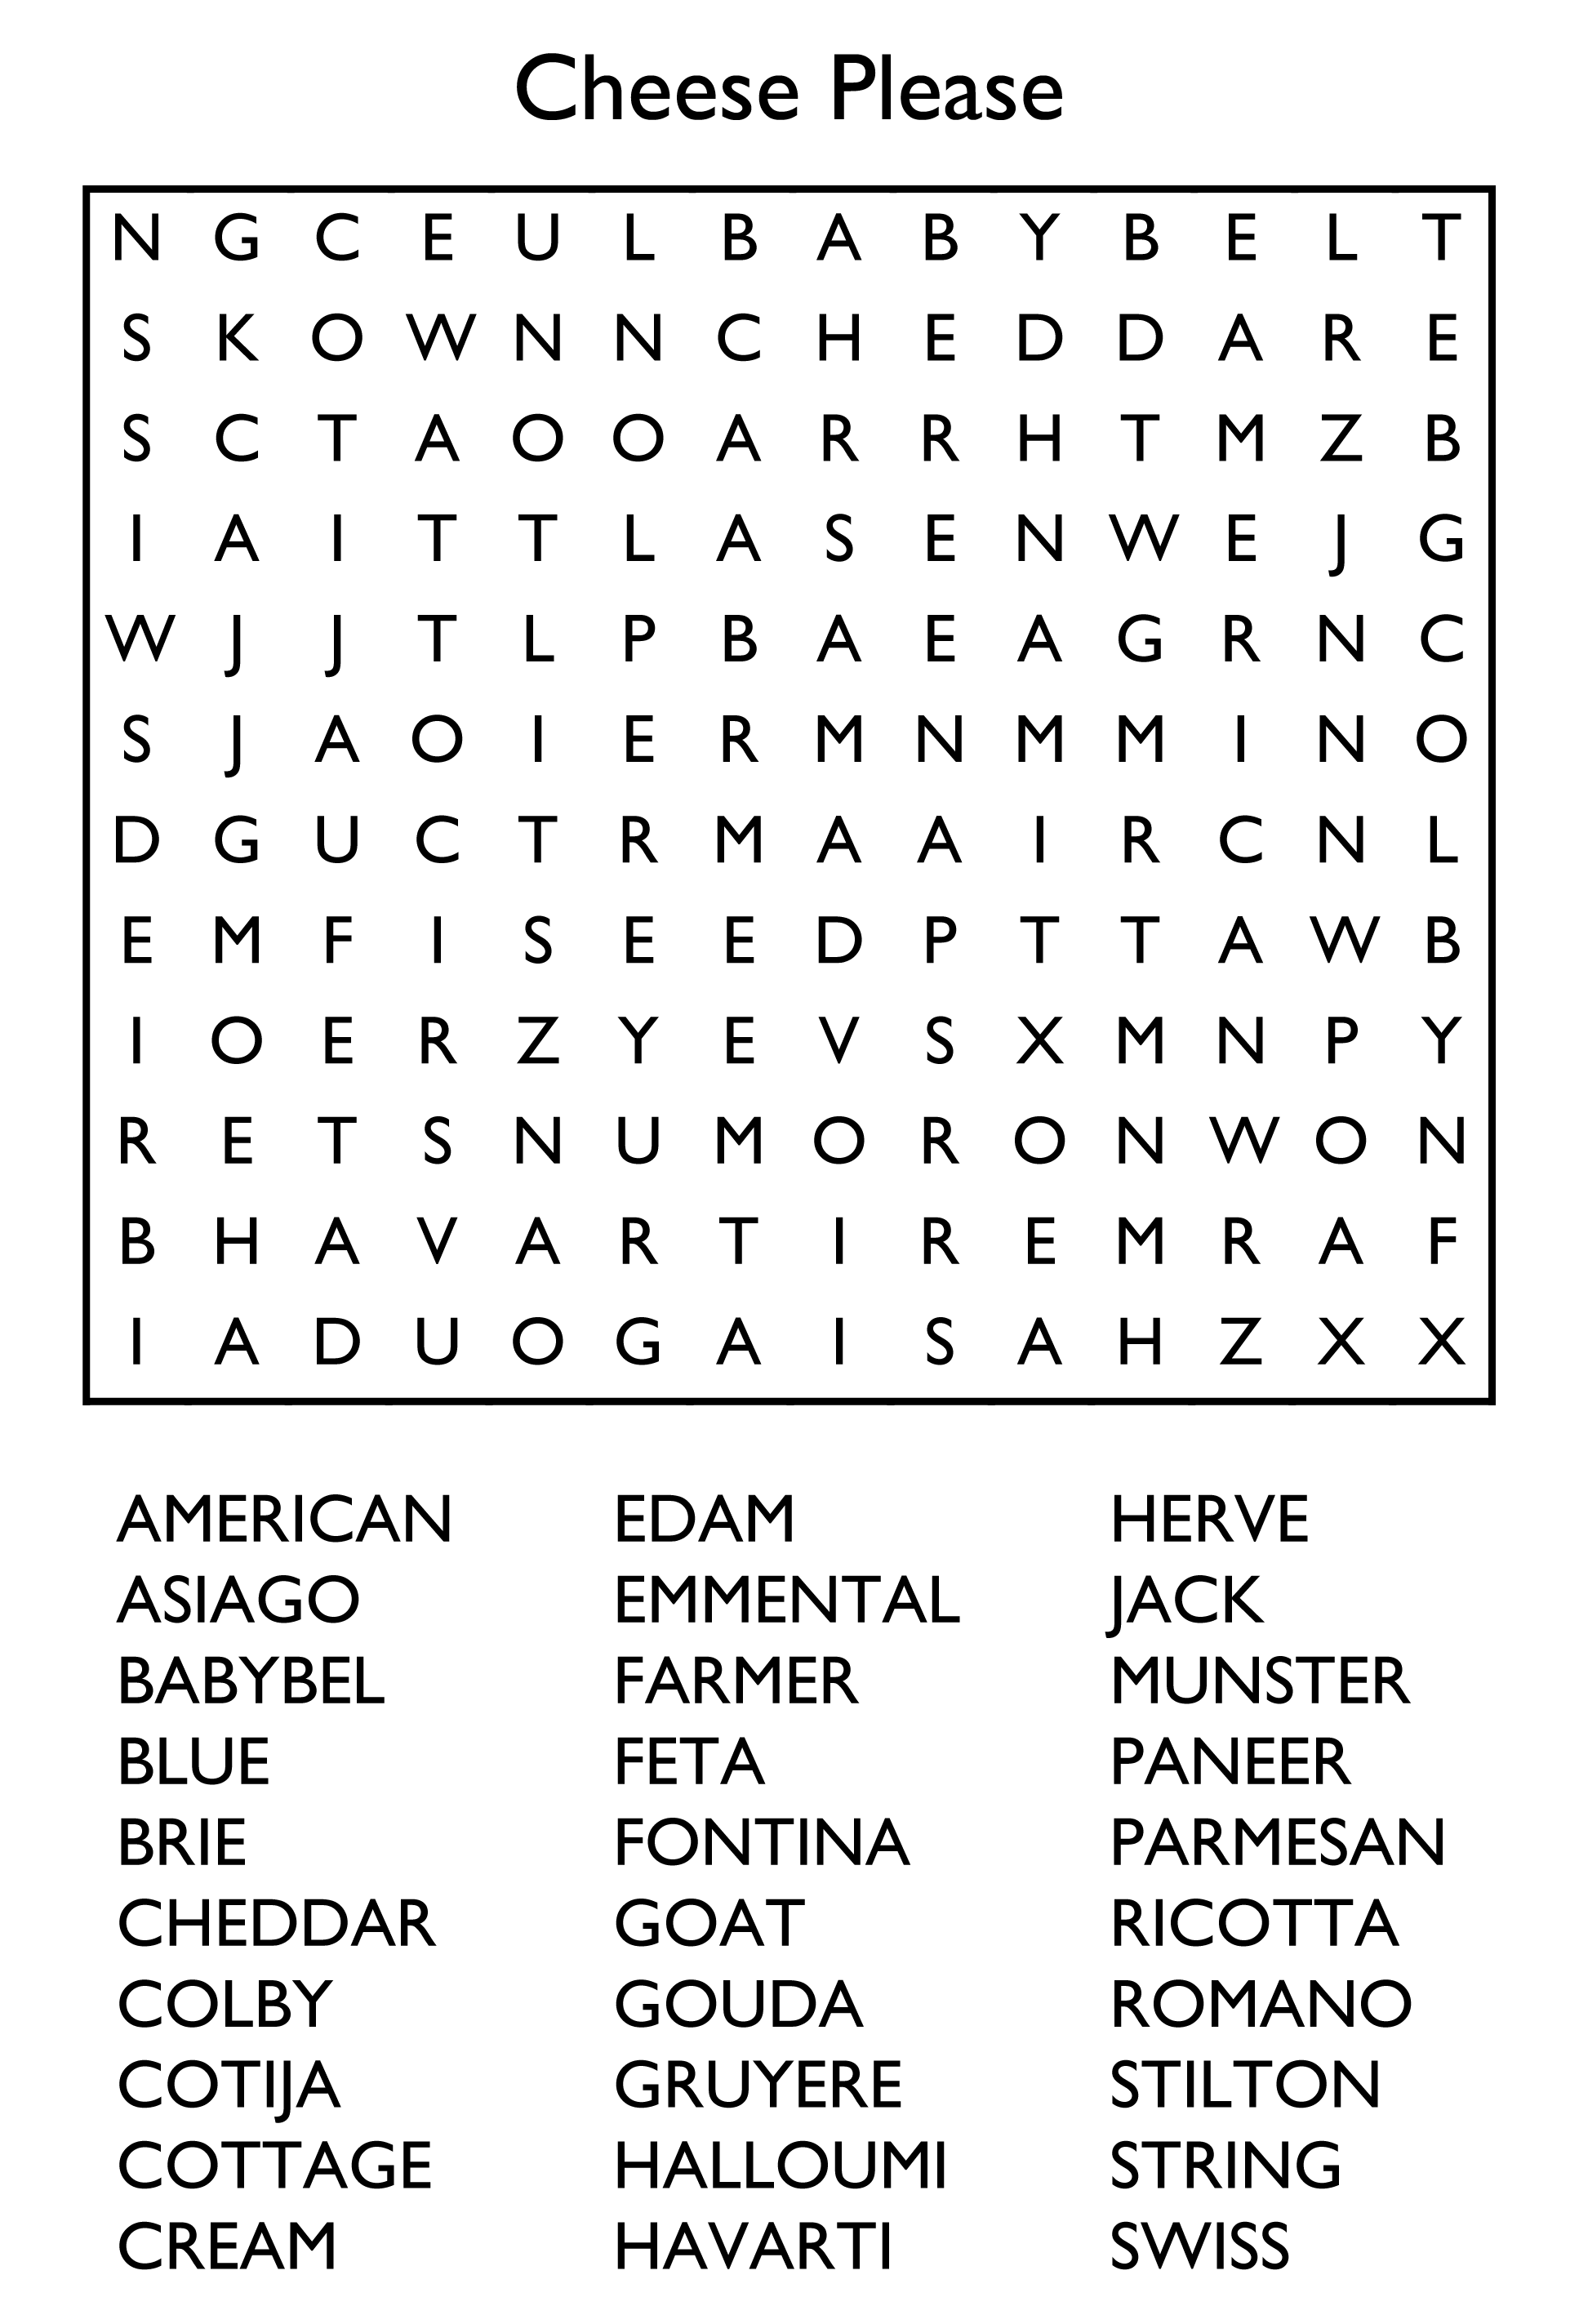 Free Printable Word Search Puzzles - Cheese